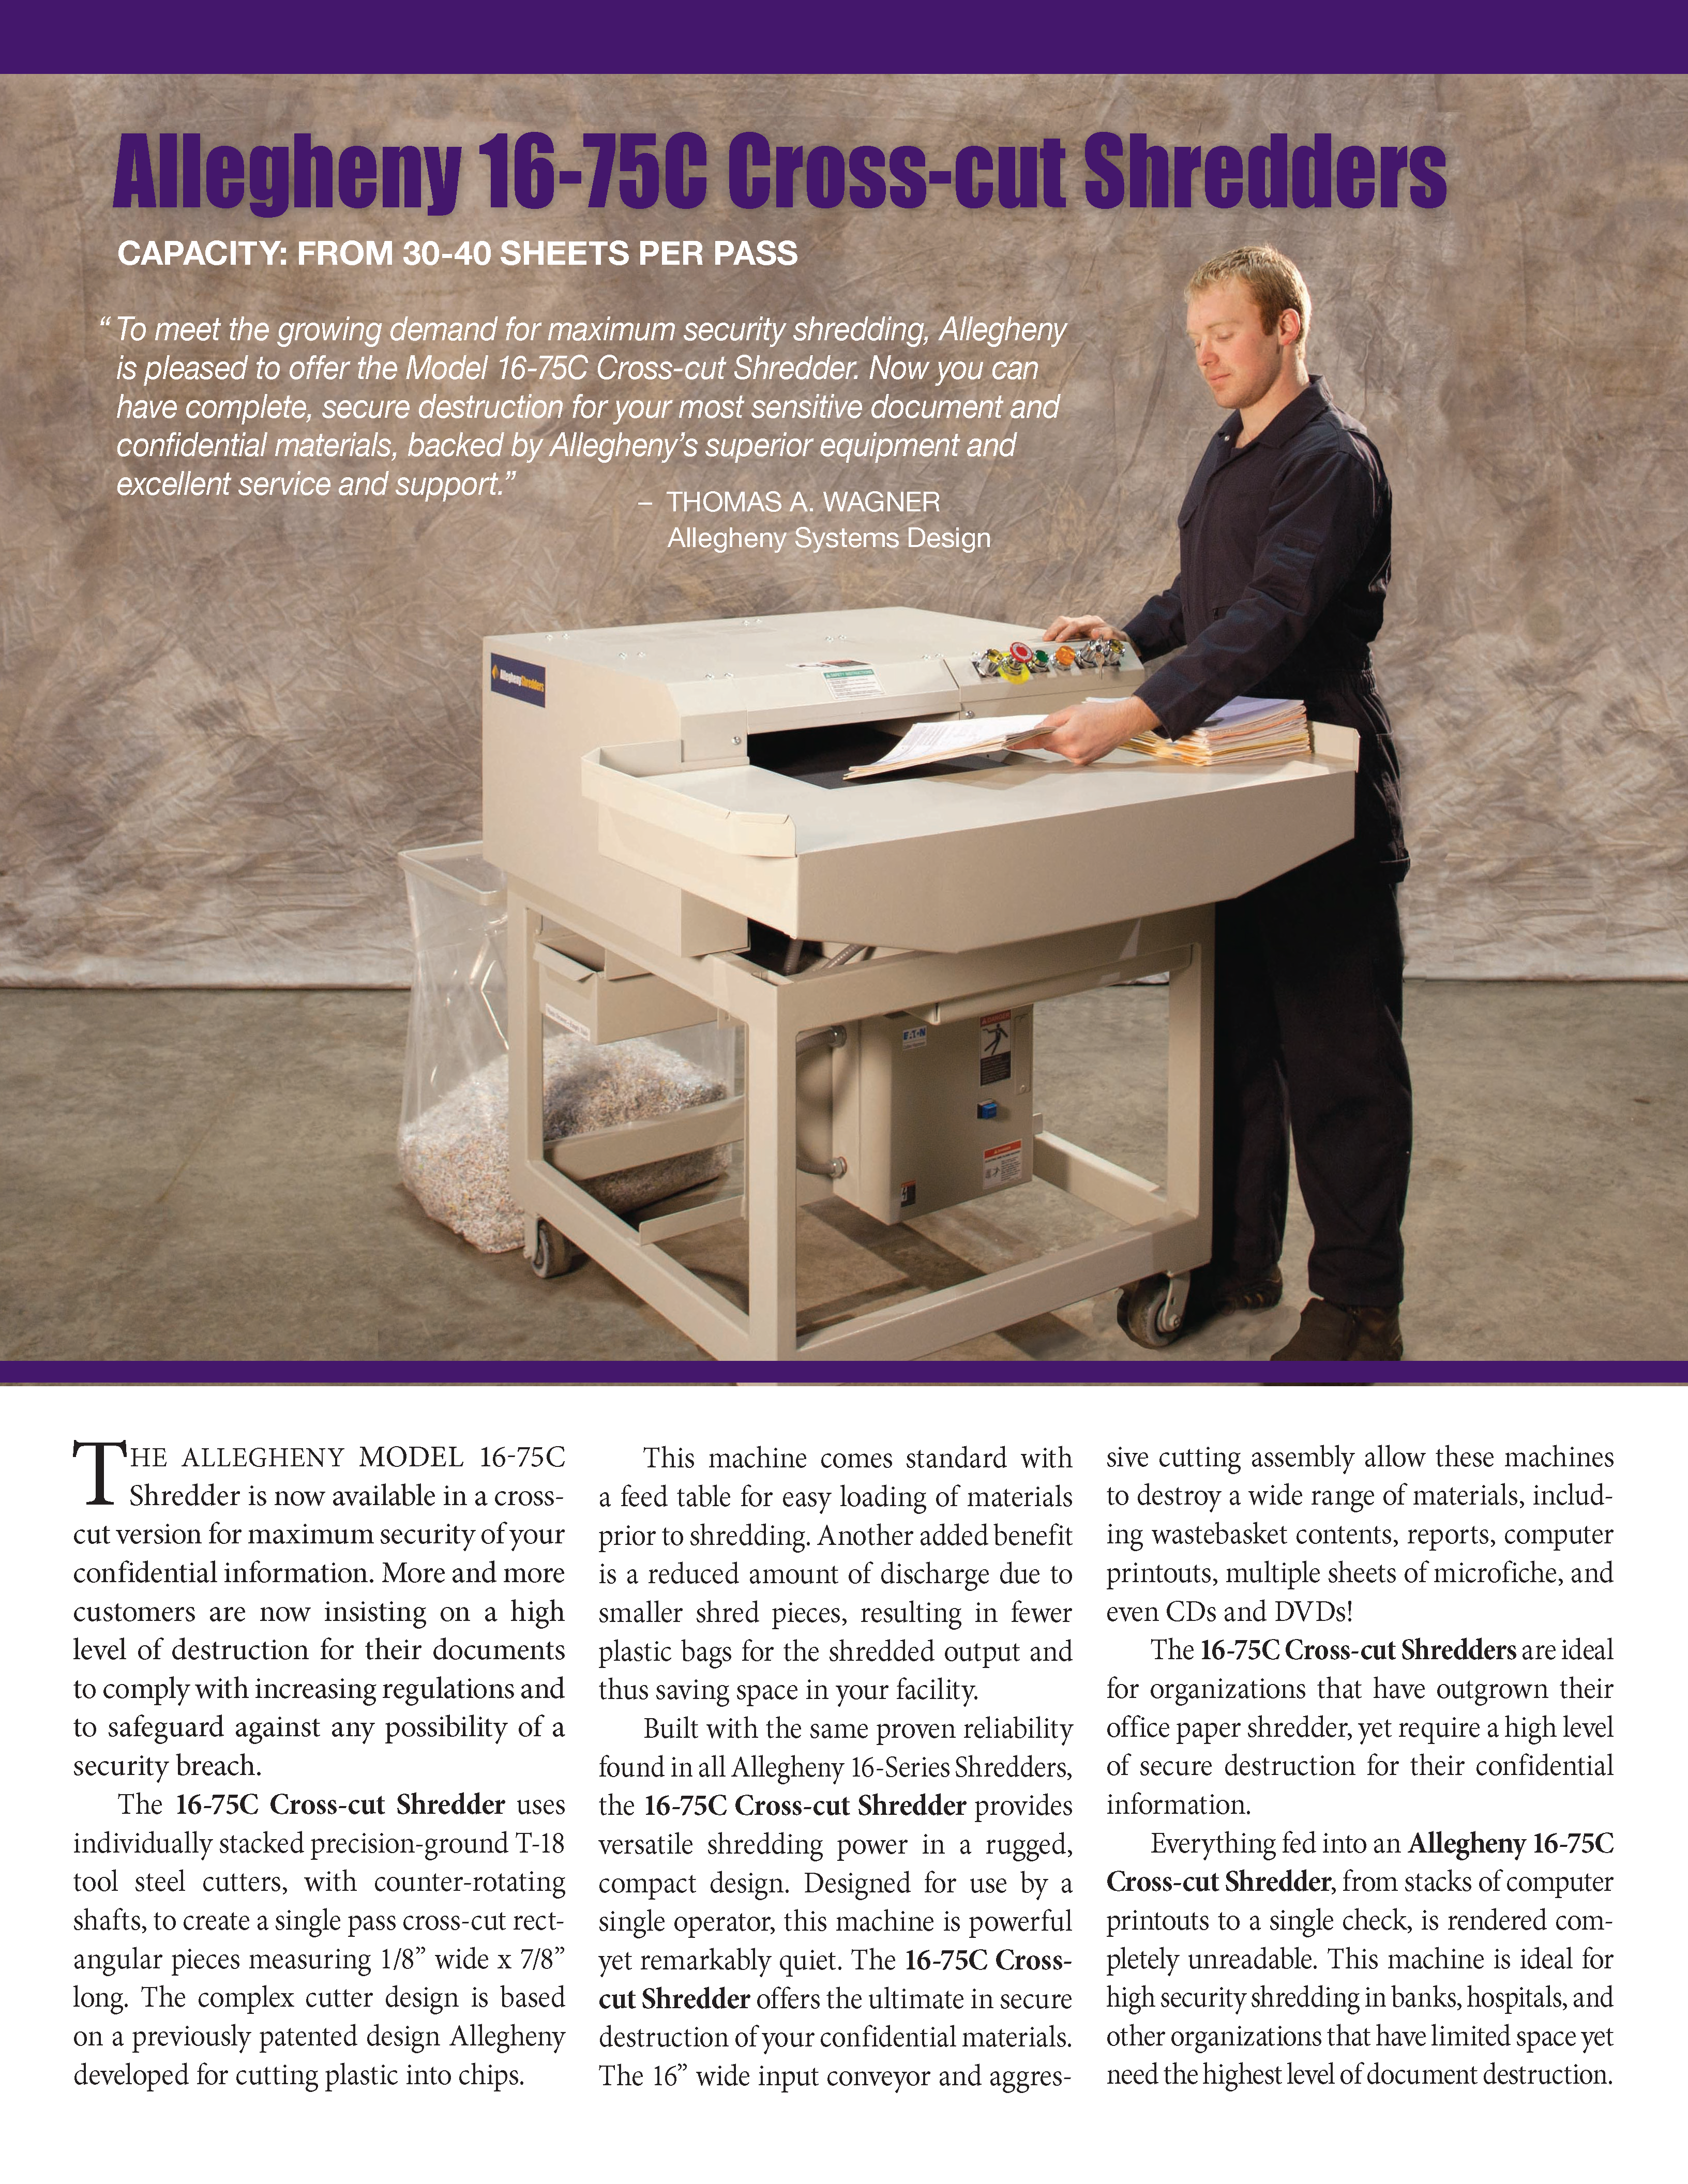 Learn more about the 16-75C Cross-cut Shredders in the Allegheny Brochure.